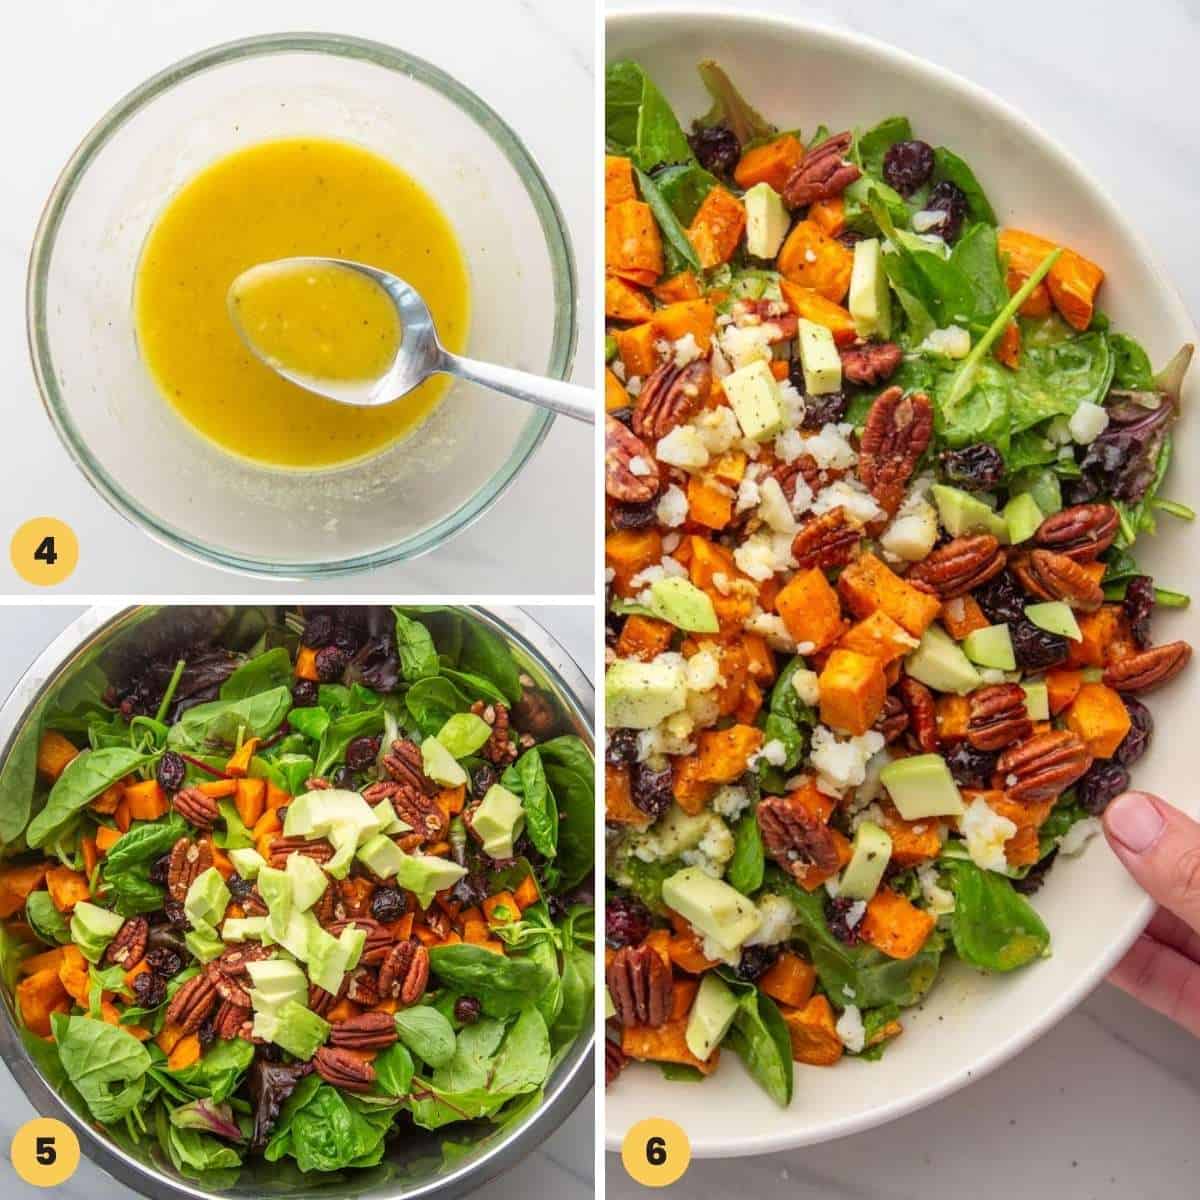 a collage of three images showing how to assemble a sweet potato salad.